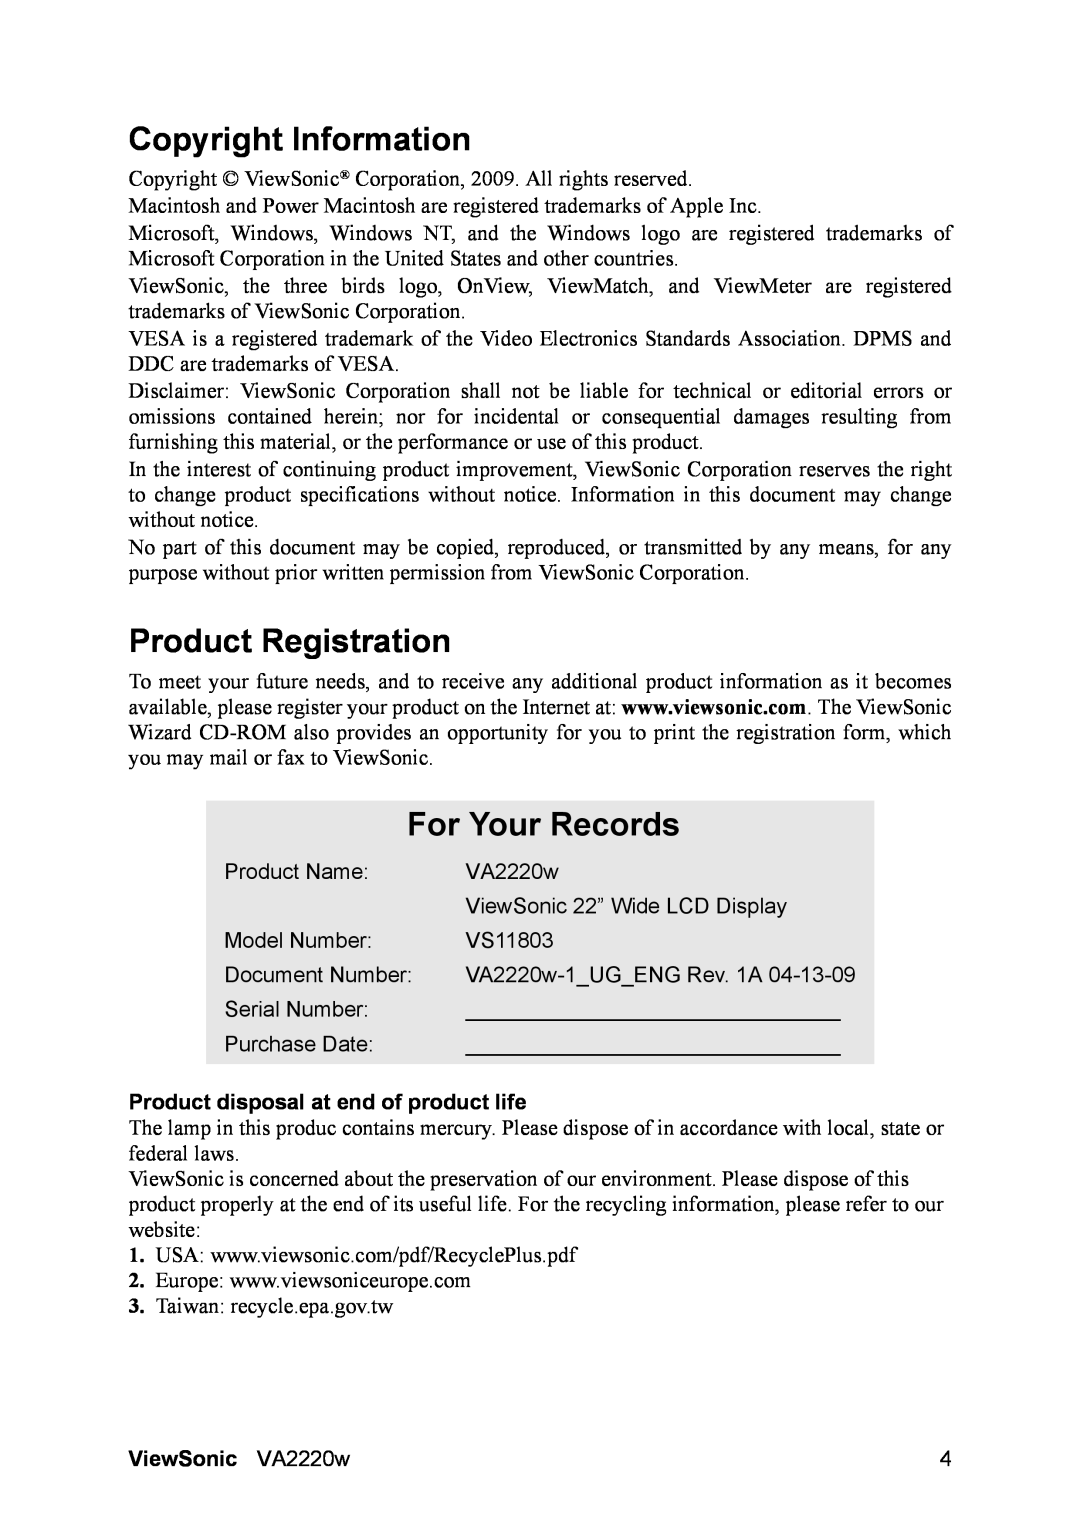 ViewSonic VA2220W Copyright Information, Product Registration, For Your Records, Product disposal at end of product life 